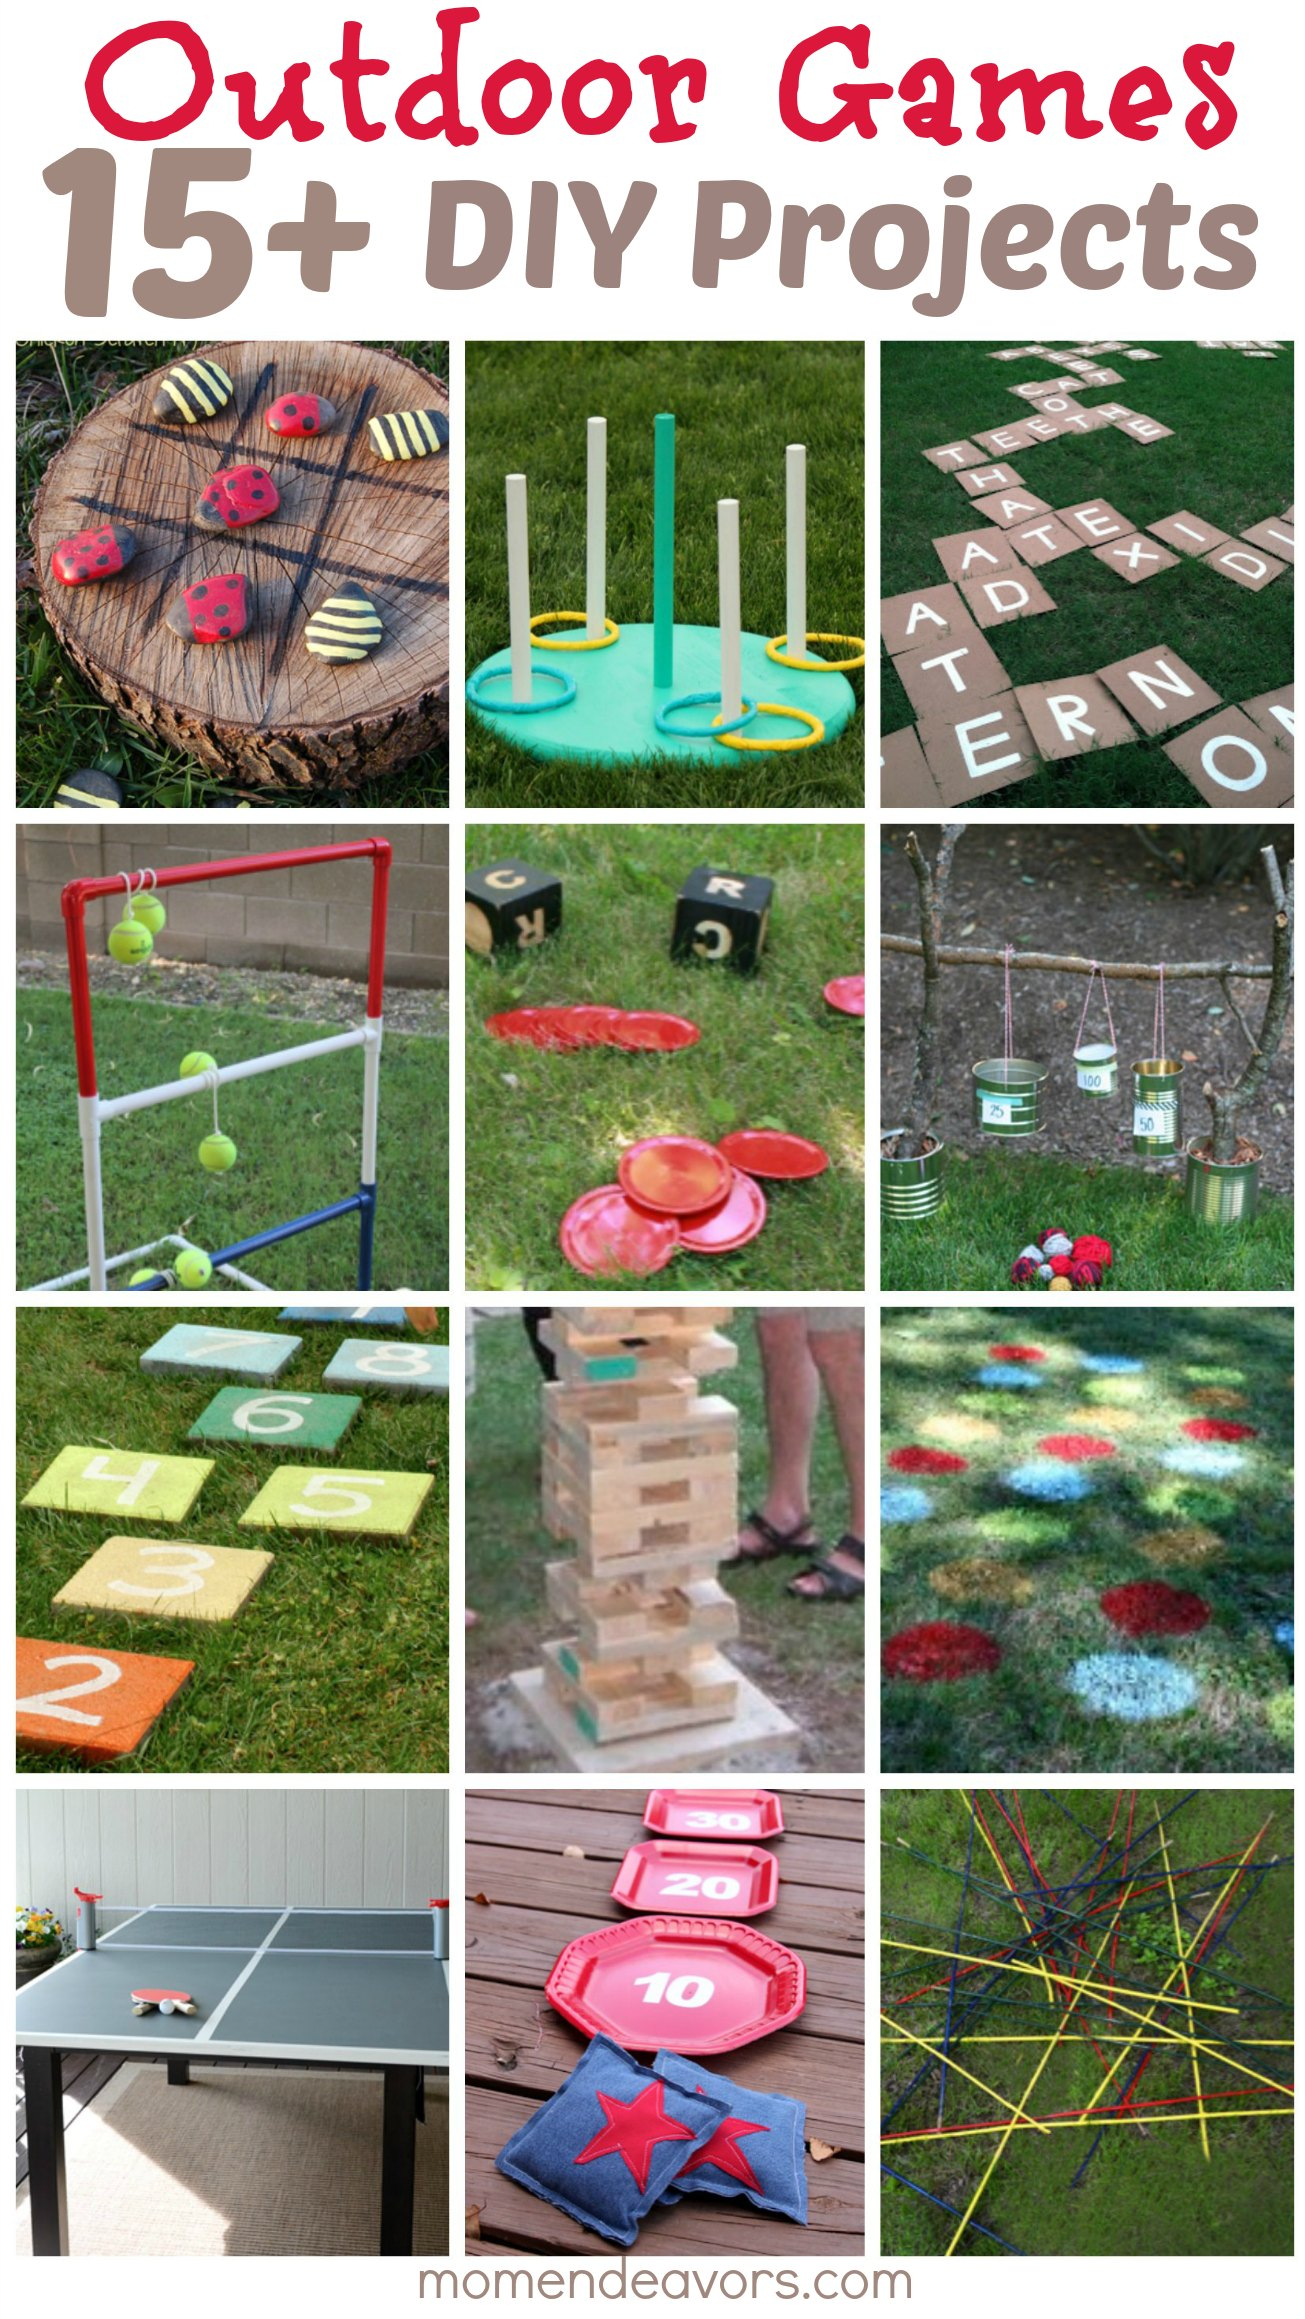 10 Great Outdoor Game Ideas For Adults diy outdoor games 15 awesome project ideas for backyard fun 2024